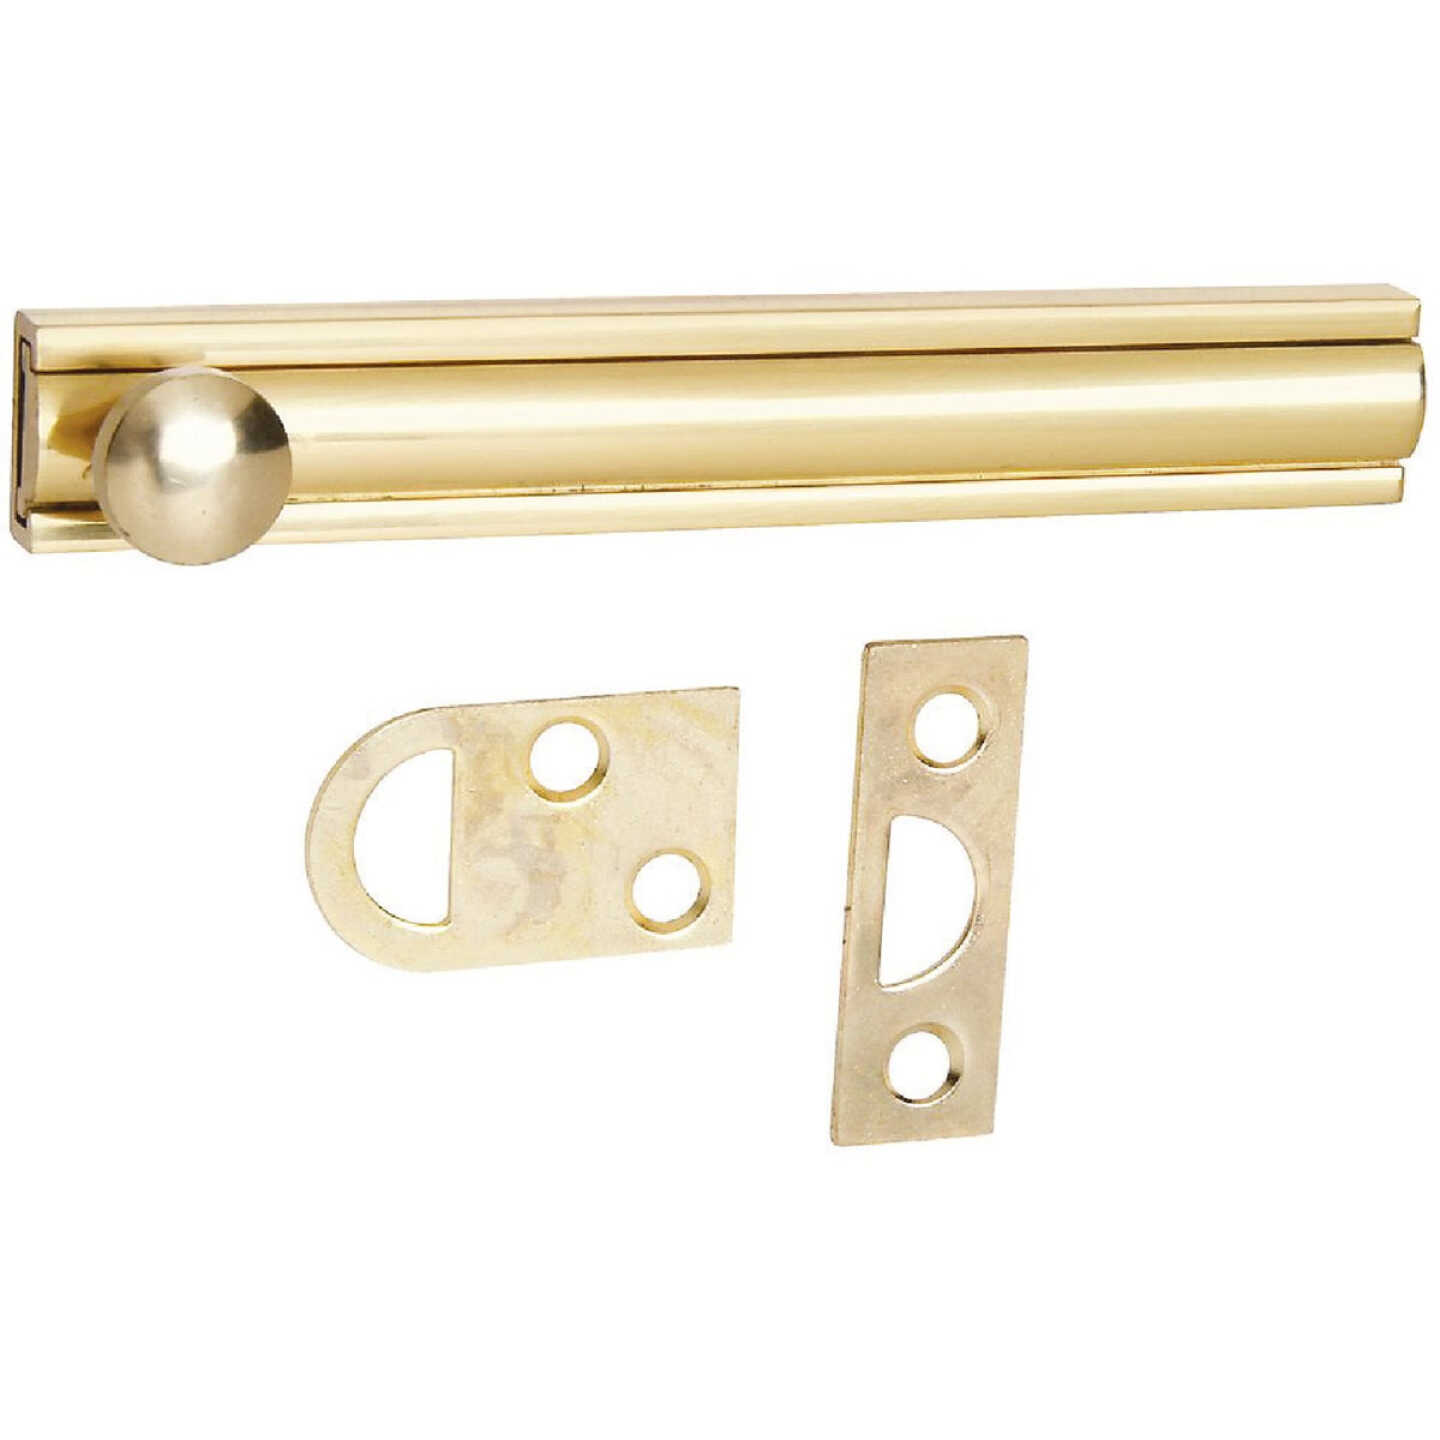 National Gallery Series 4 In. Polished Brass Door Surface Bolt Image 1